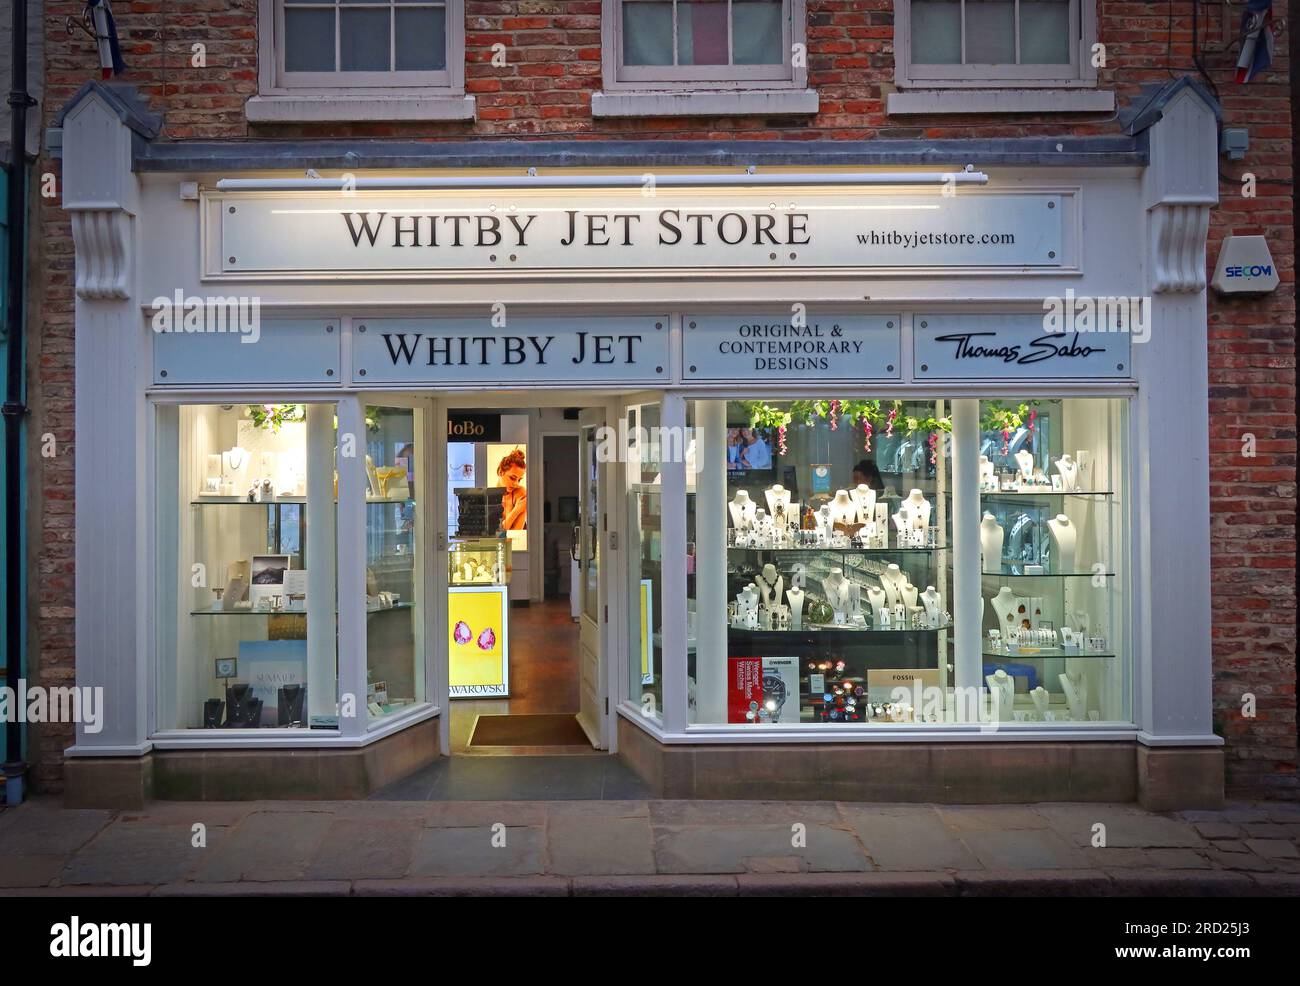 Magasins touristiques Whitby, The Whitby Jet Store, 145 Church St, Whitby, North Yorkshire, Yorkshire, Angleterre, ROYAUME-UNI, YO22 4DE Banque D'Images